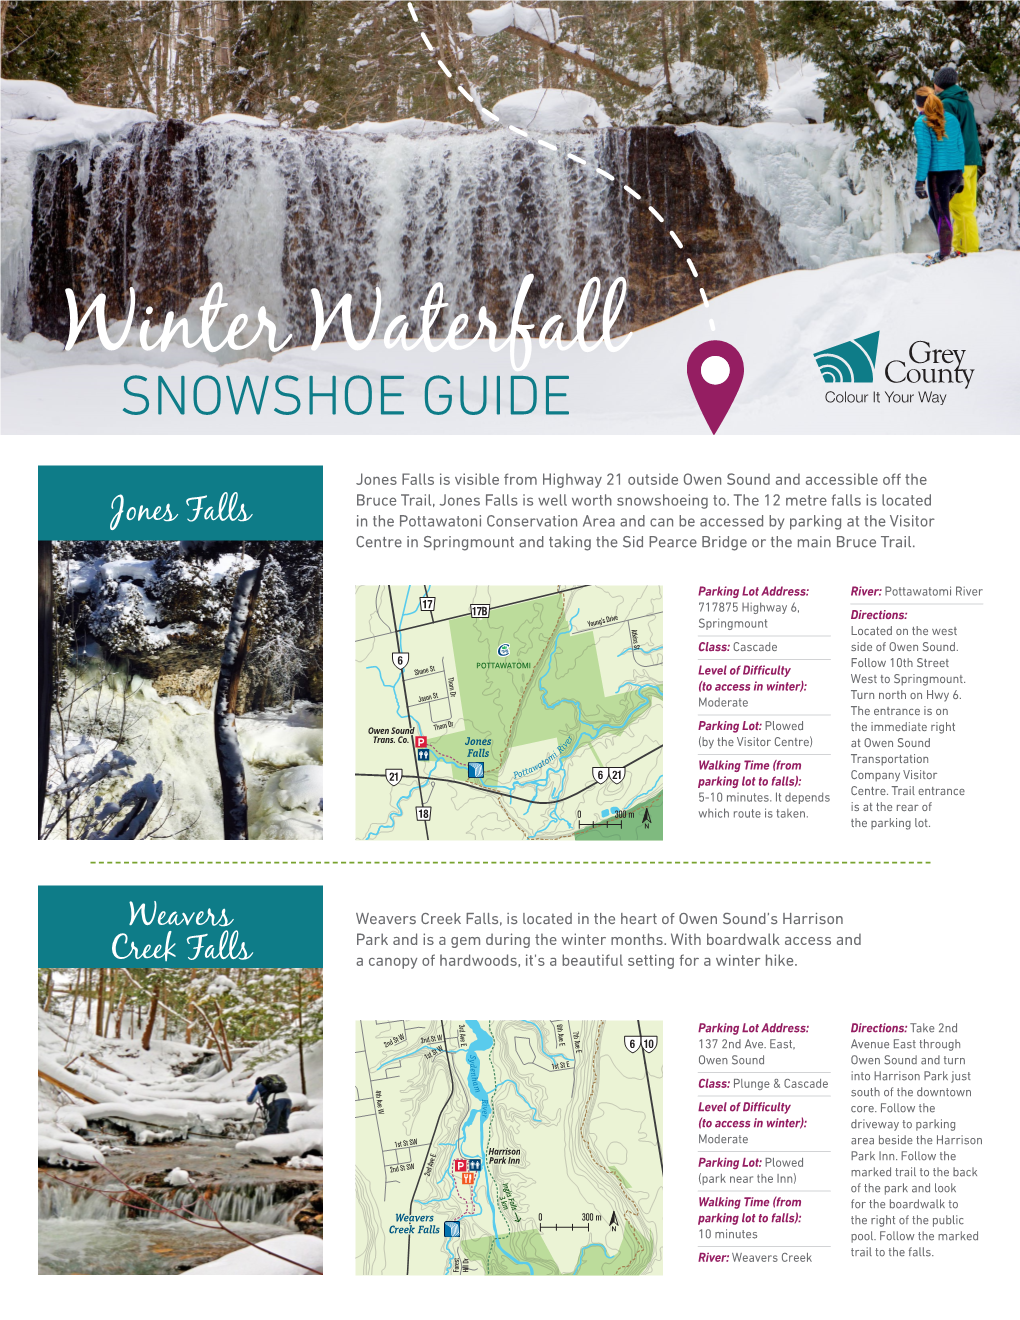 Winter Waterfall Guide Has Waterfall Area Shown in This Guide